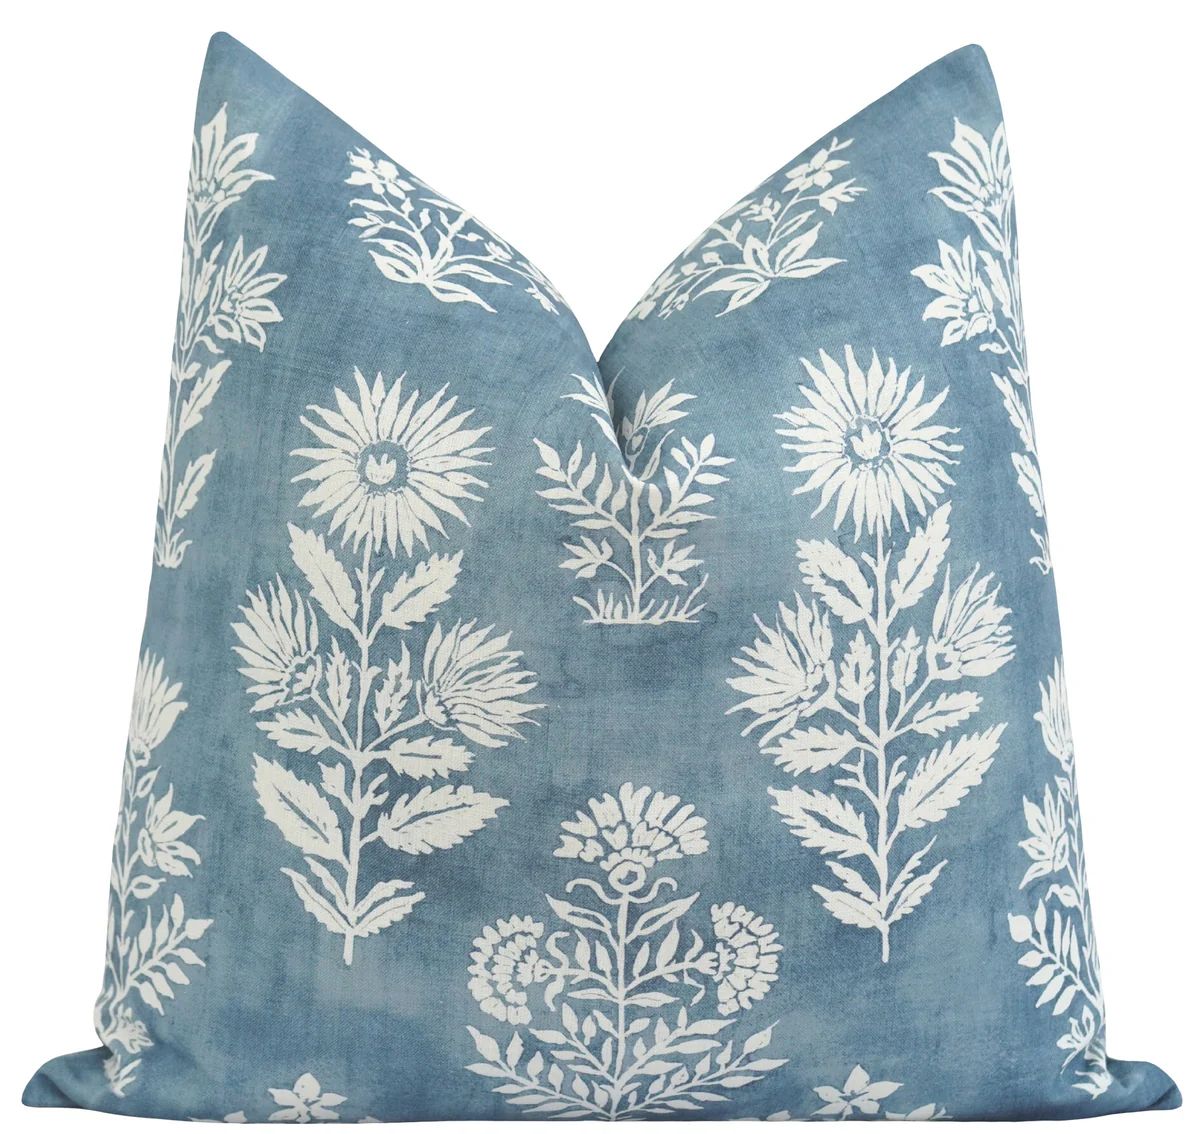 Hodge Blue Floral Pillow | Land of Pillows